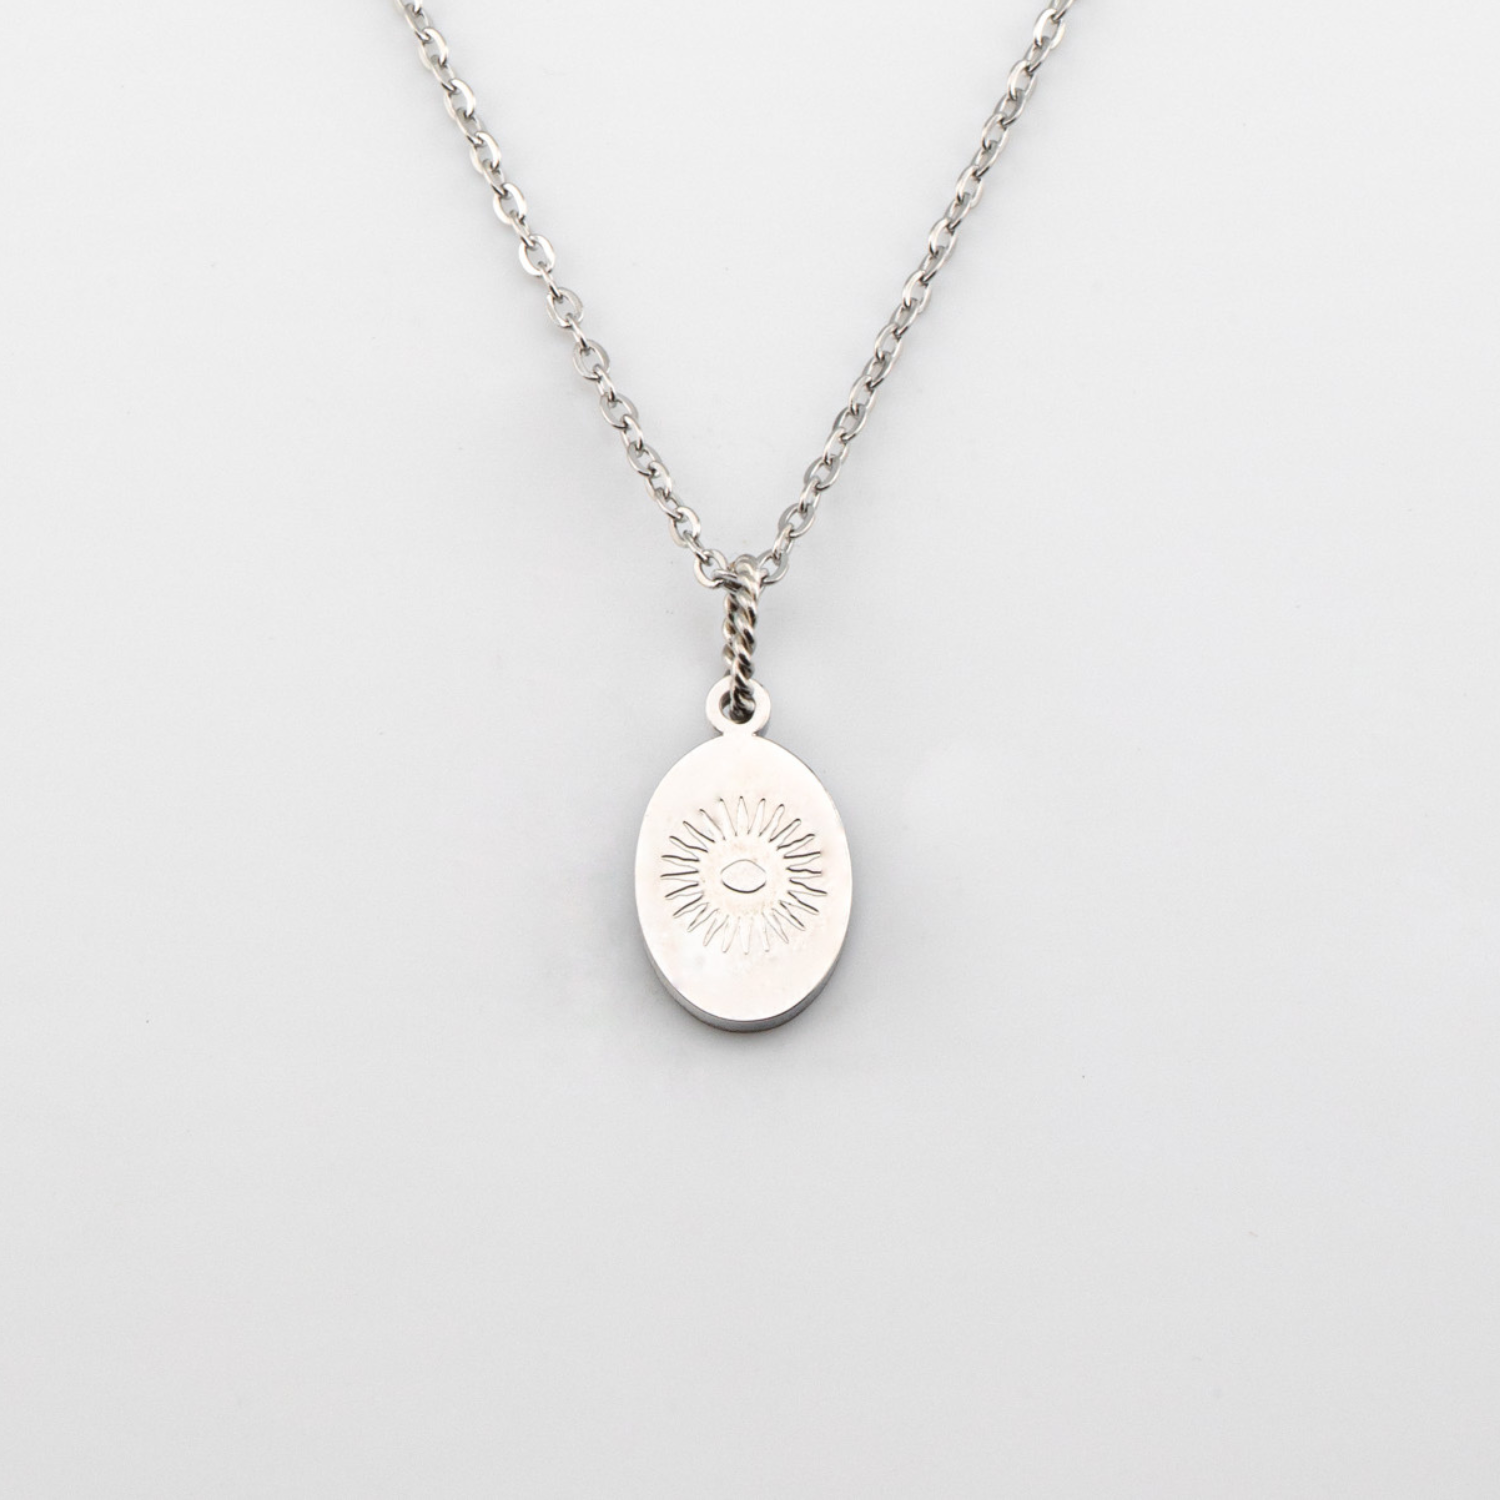 Silver Oval St. Christopher Necklace